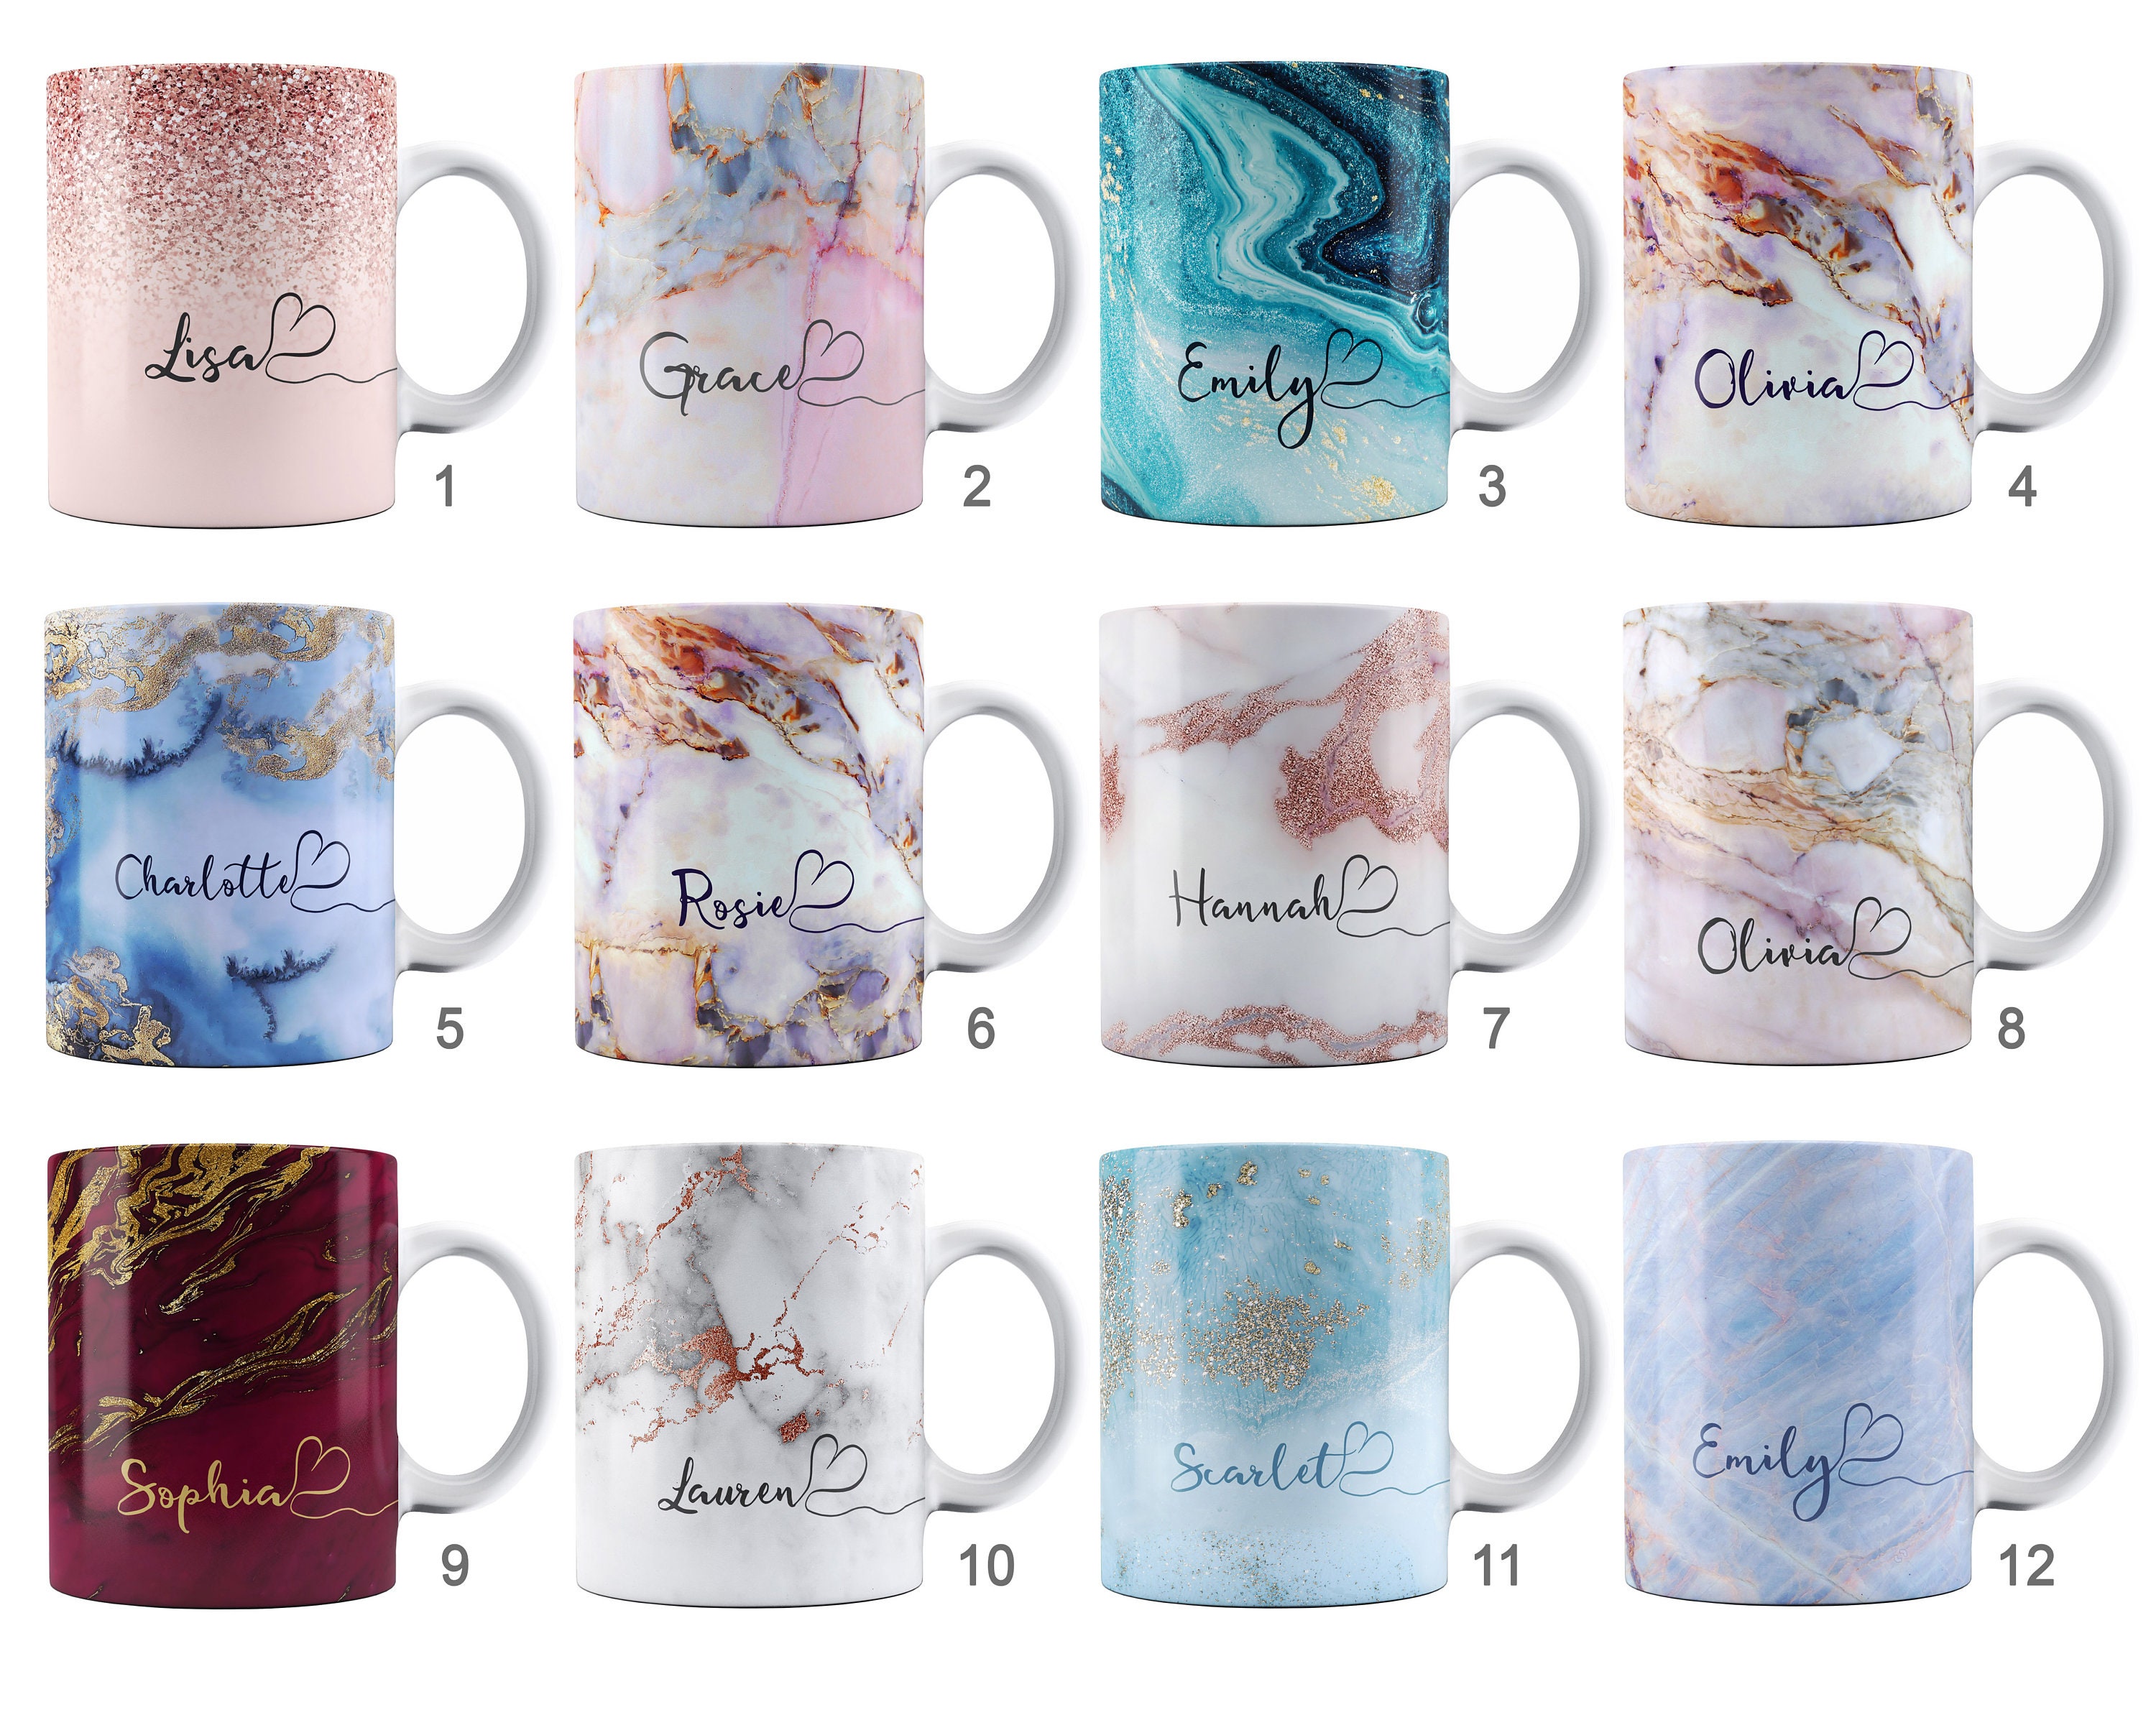 Single - Personalized Marble Coffee Mug w/Initial & Name - 11 oz, Pink - Custom Letter Coffee Mugs for Women - Bridal Shower Gifts, Coworker Gifts